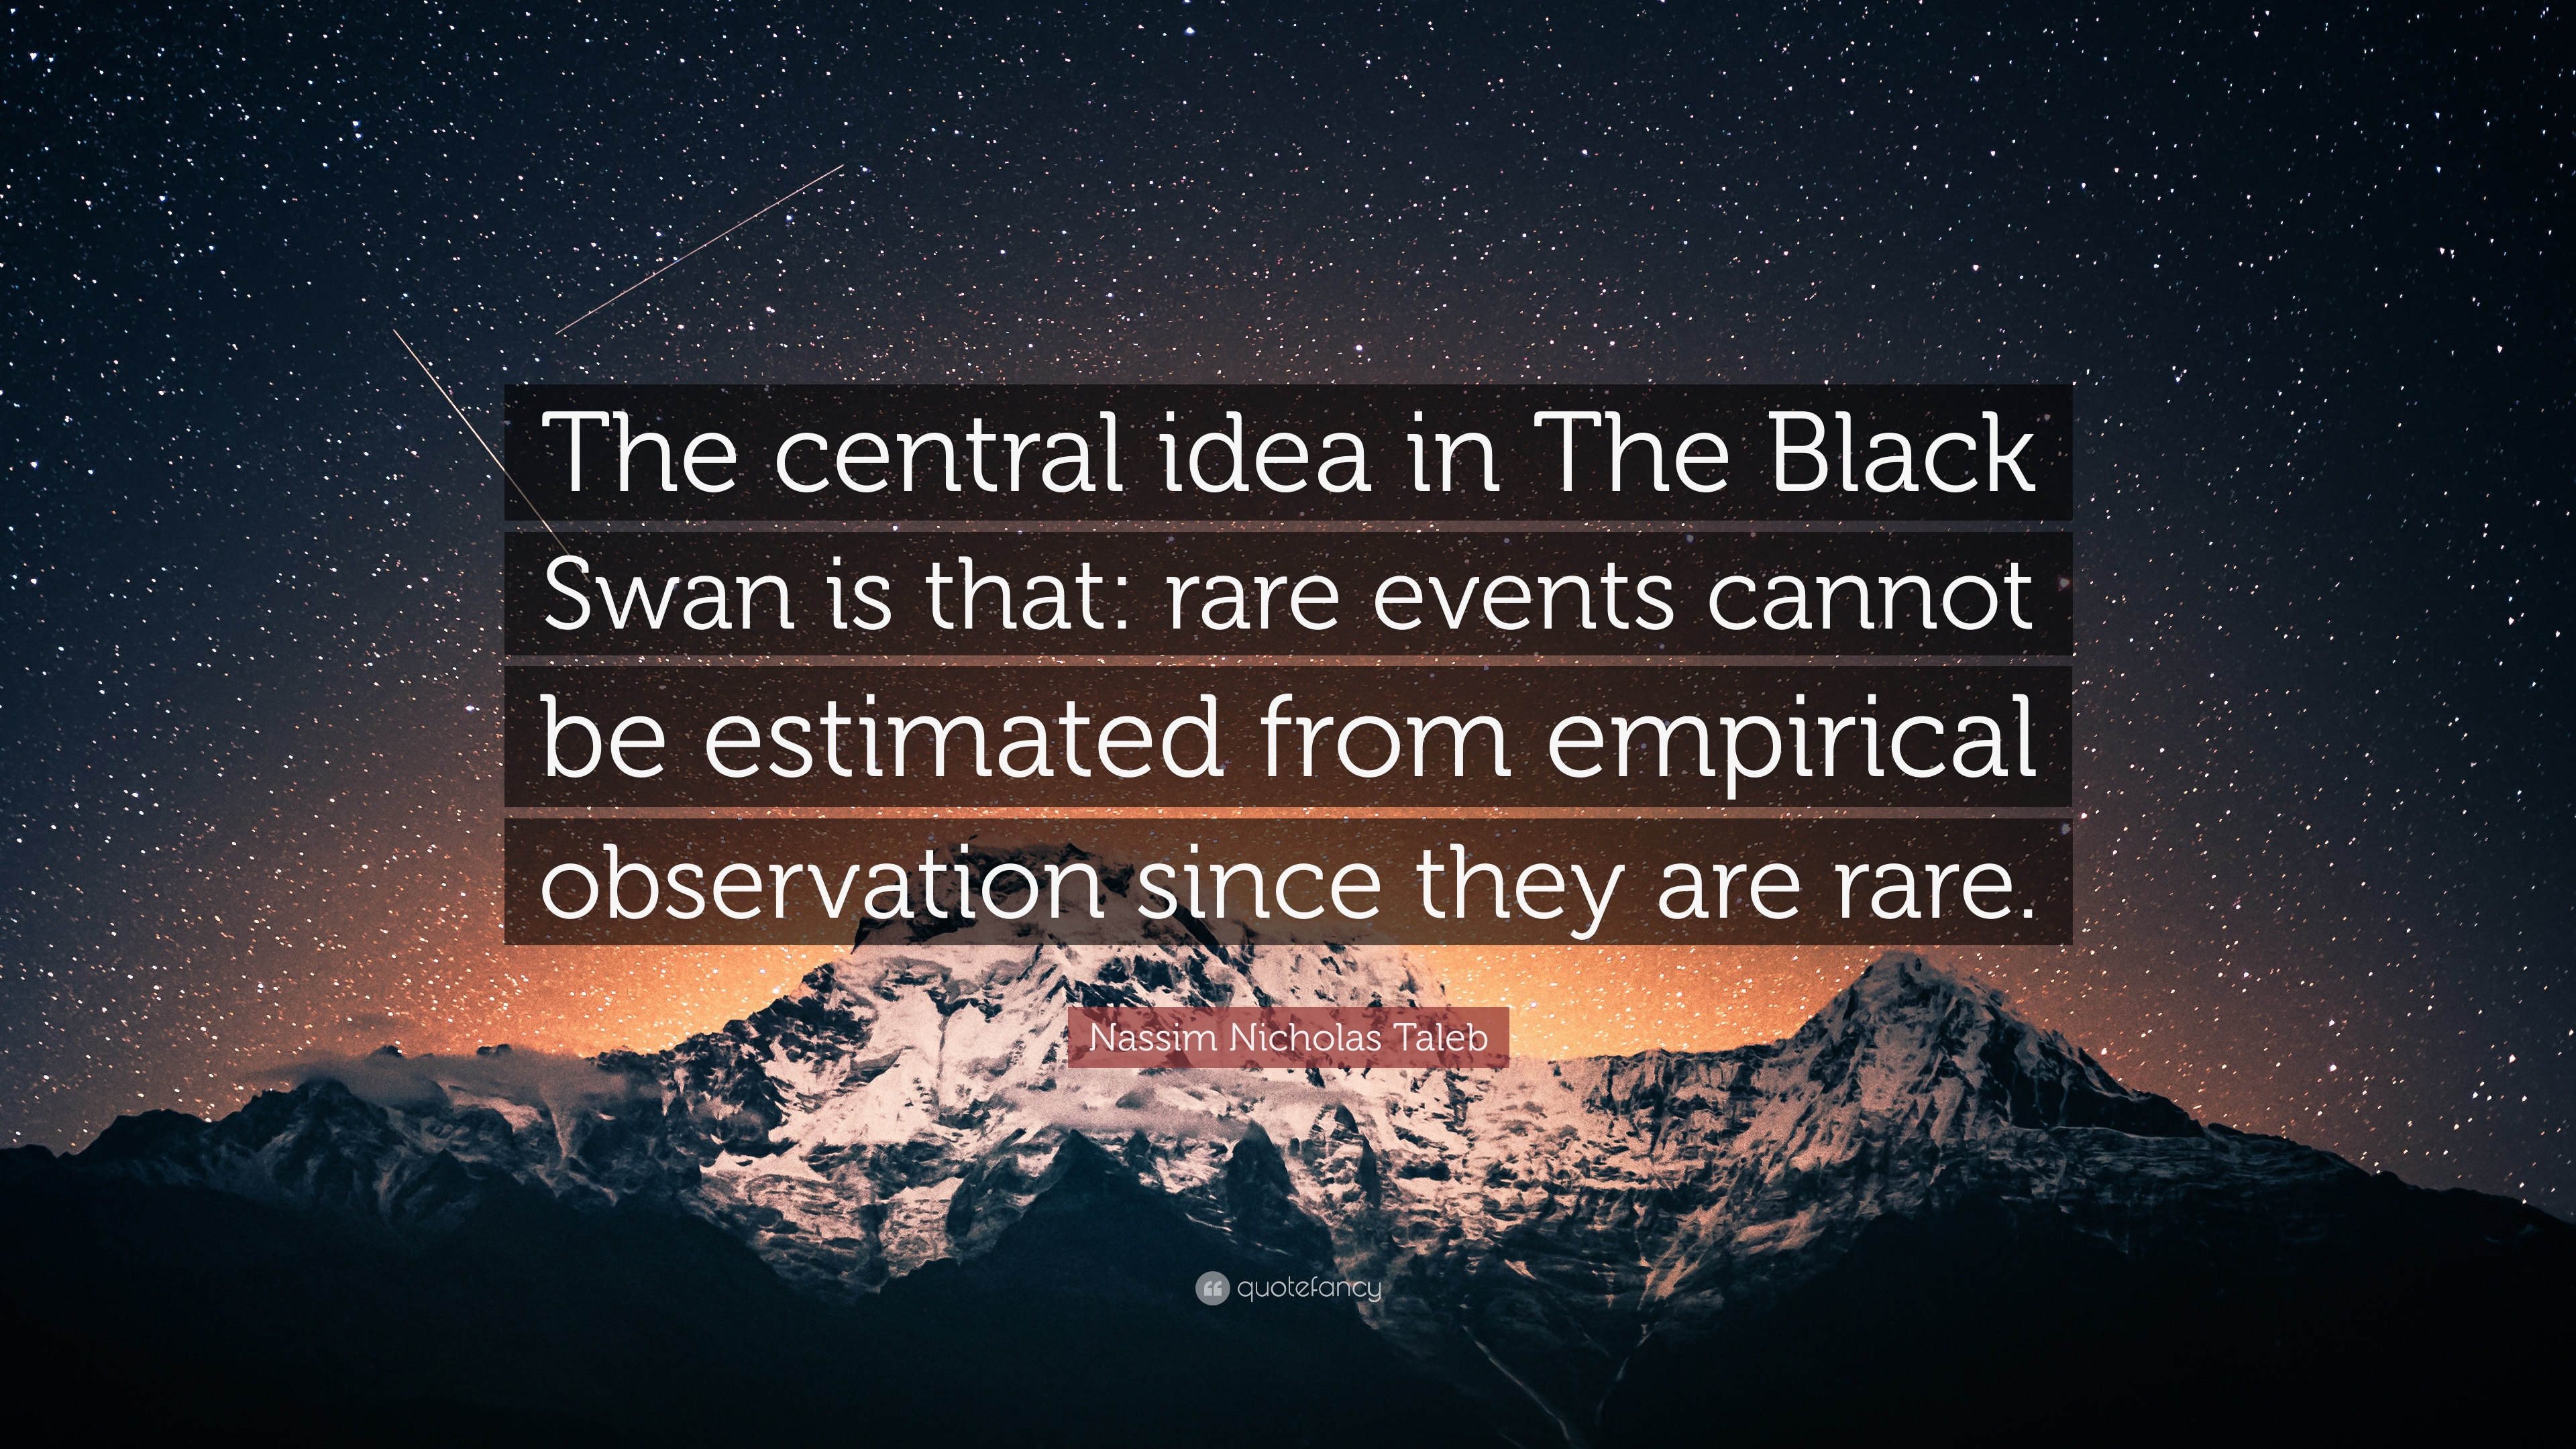 Nassim Nicholas Taleb Quote: idea in The Black Swan is that: rare events cannot estimated from empirical since they are ra...”